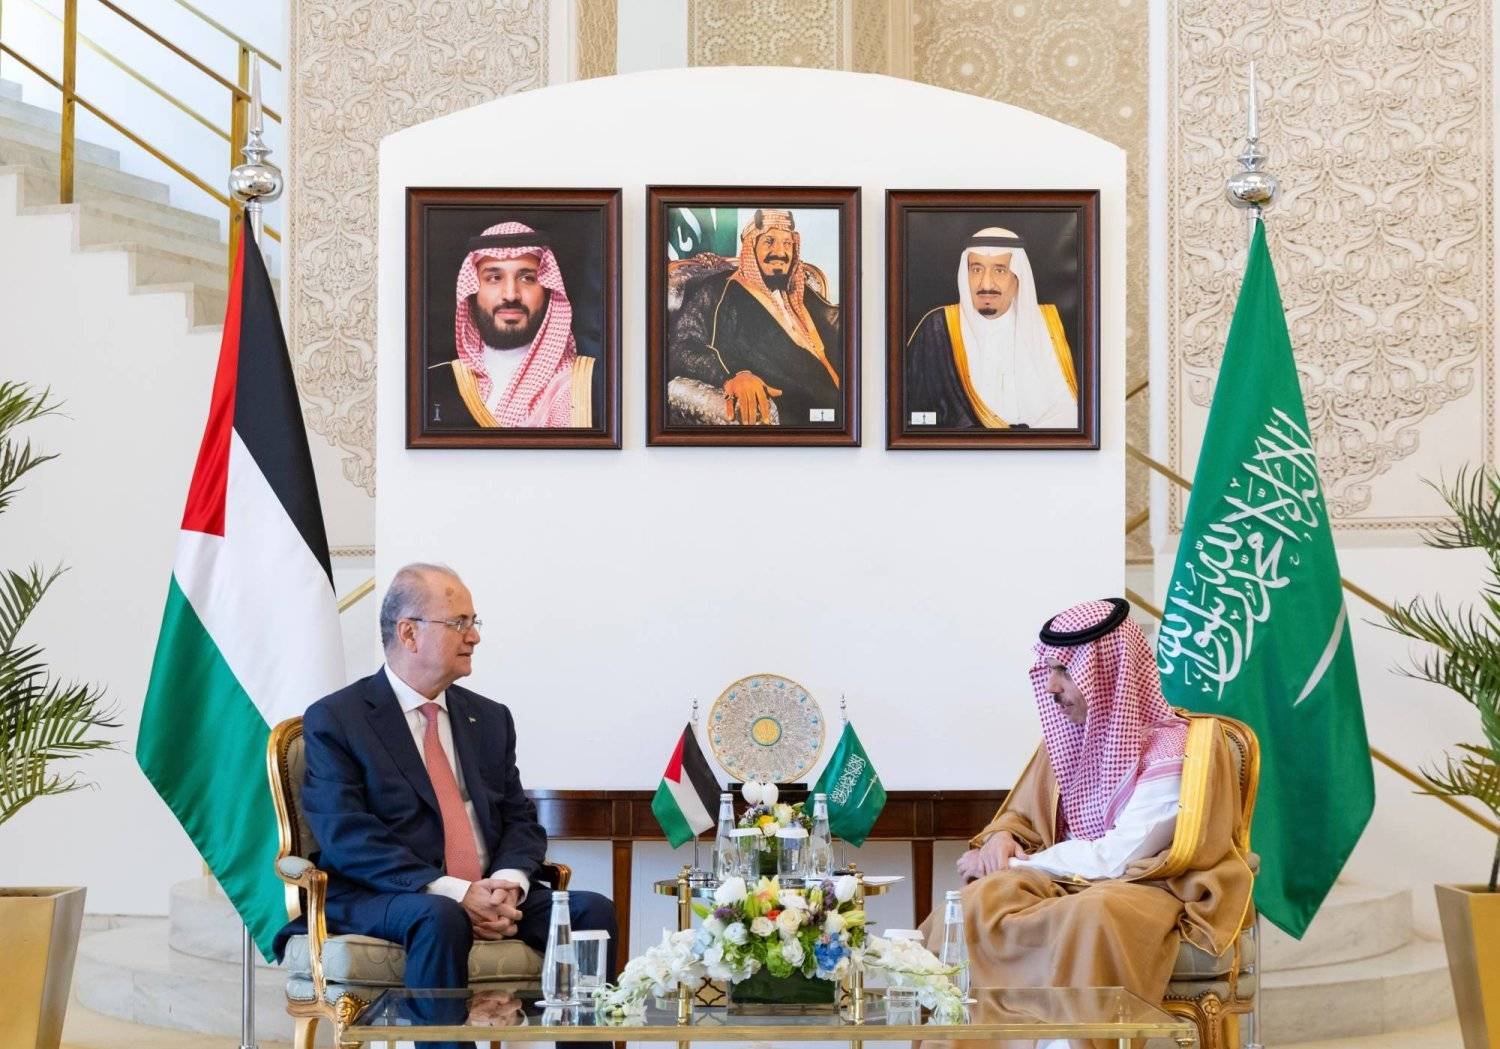 Saudi Minister of Foreign Affairs Prince Faisal bin Farhan bin Abdullah met in Riyadh on Thursday with the Palestinian Prime Minister and Foreign Minister, Dr. Mohammad Mustafa. SPA

